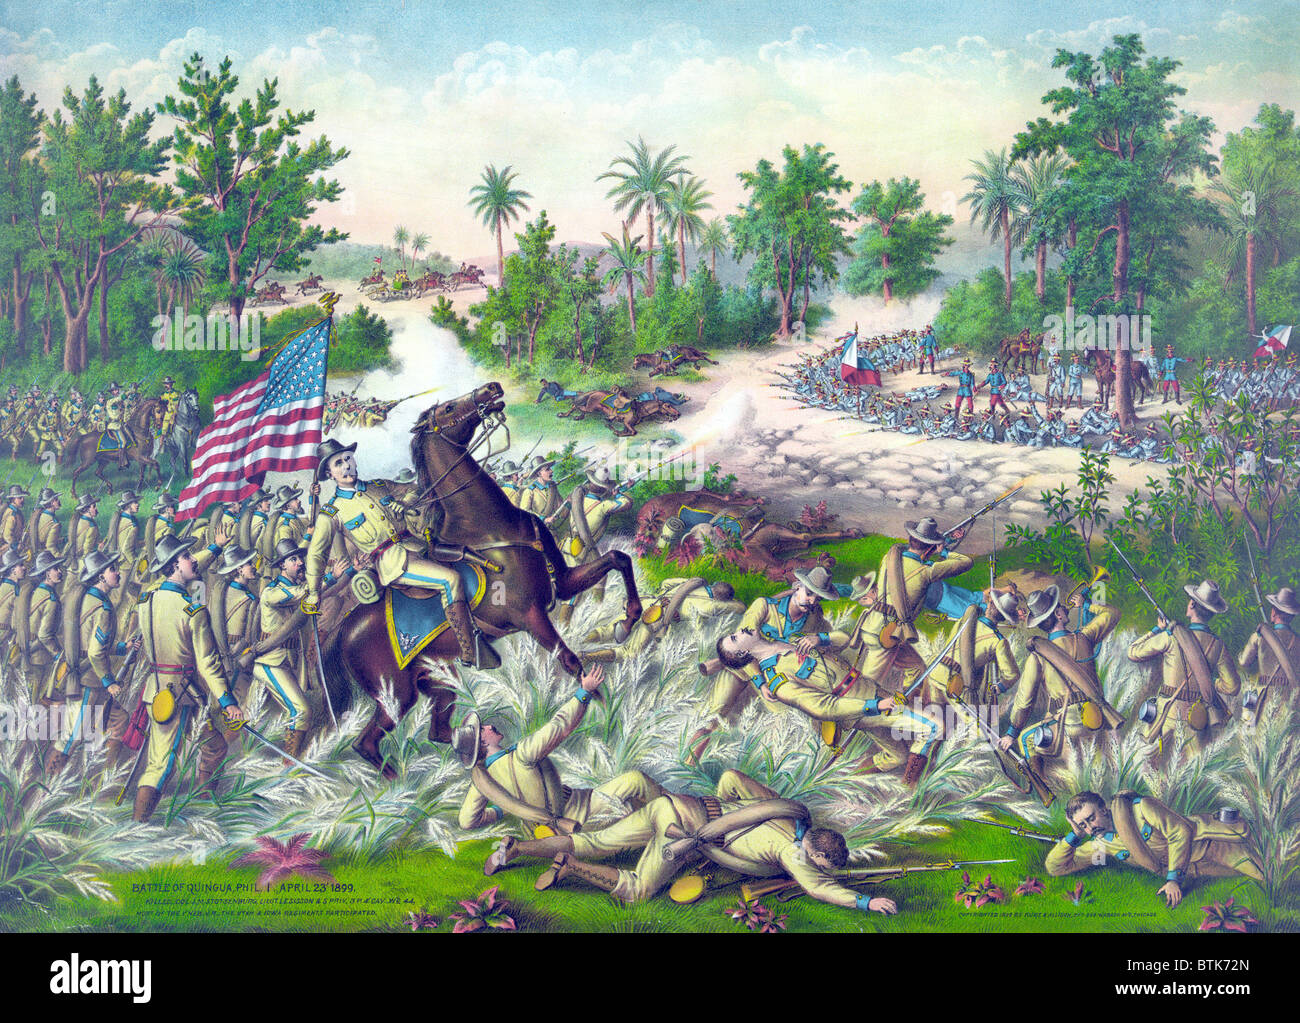 The Philippine–American War. The Battle of Quingua. Colonel Stotsenburg and the 1st Nebraskan Infantry come under fire from the Filipino army. color lithograph, April 23, 1899 Stock Photo